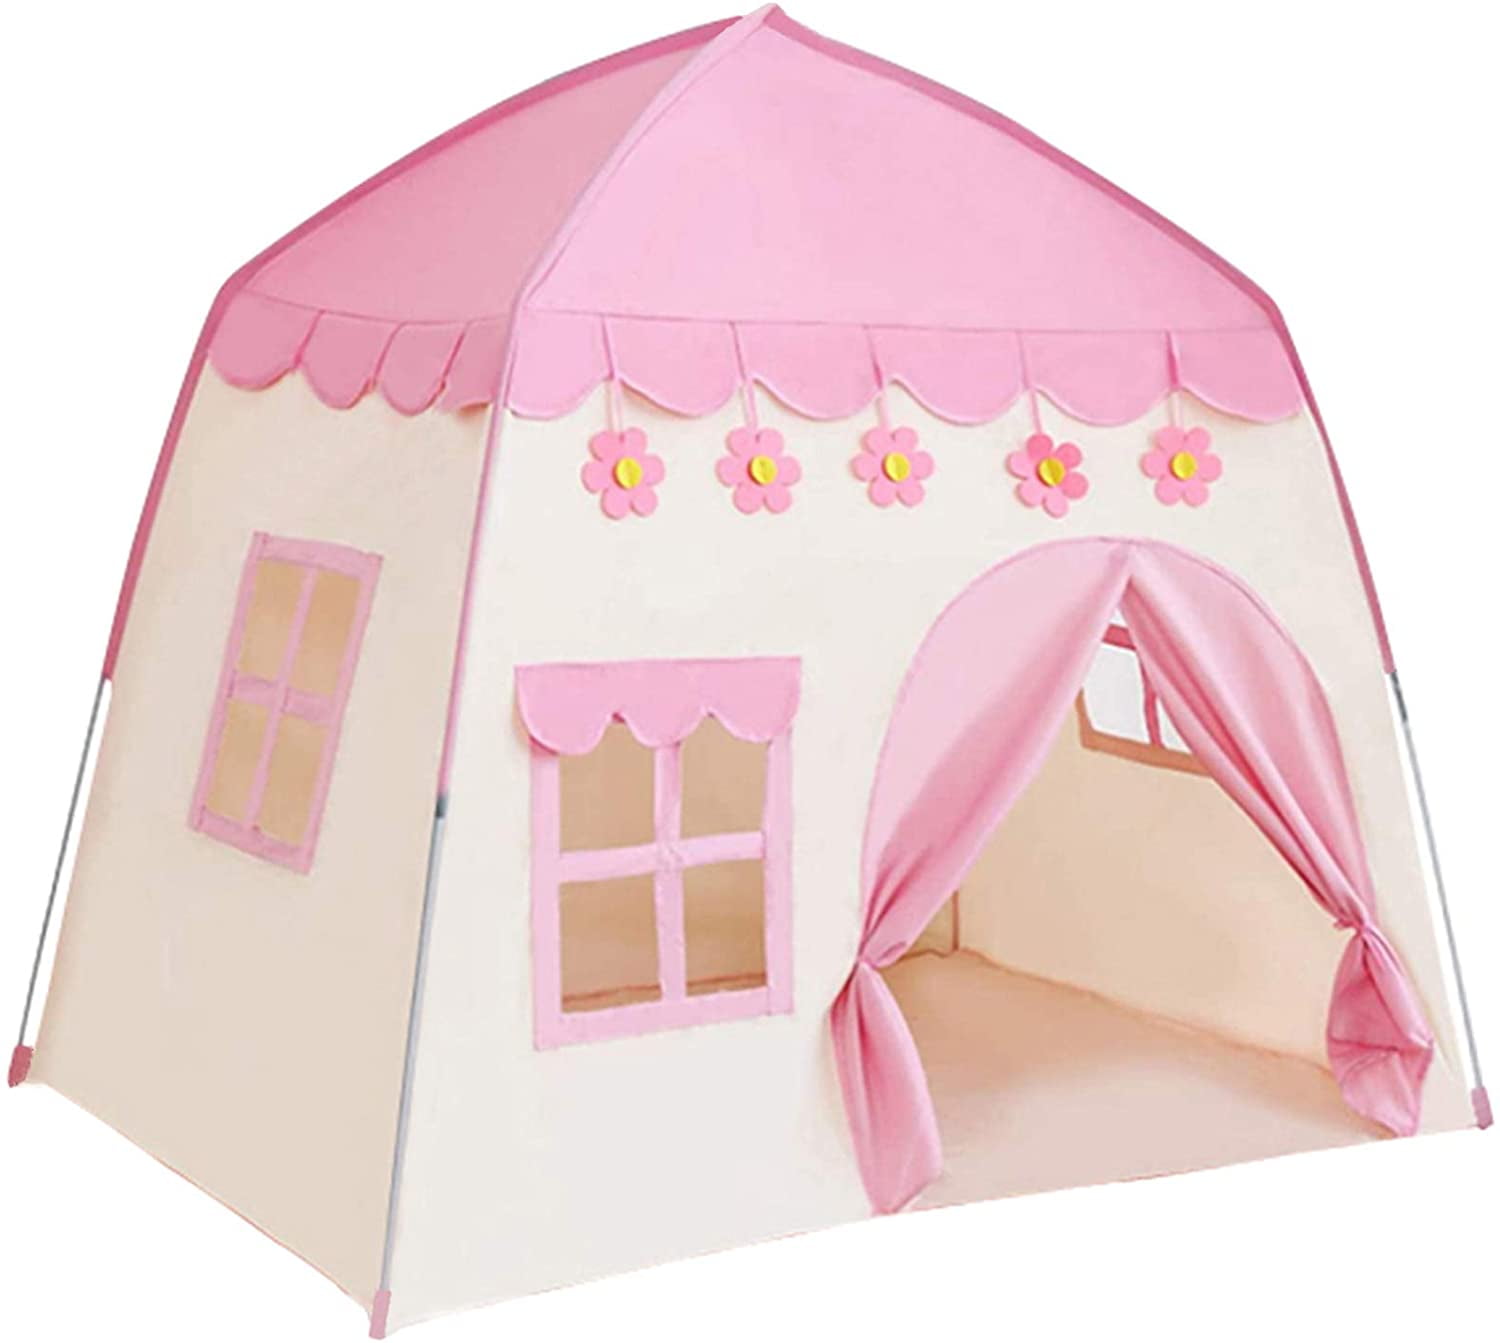 TTLOJ Pink Kids Play Tents for Girls Fairy Tale Teepee Tent Indoor Outdoor（Ball Lights NOT Included Princess Castle Tent Large Fairy Playhouse Gift Toys for Girl Toddler Children Play House 